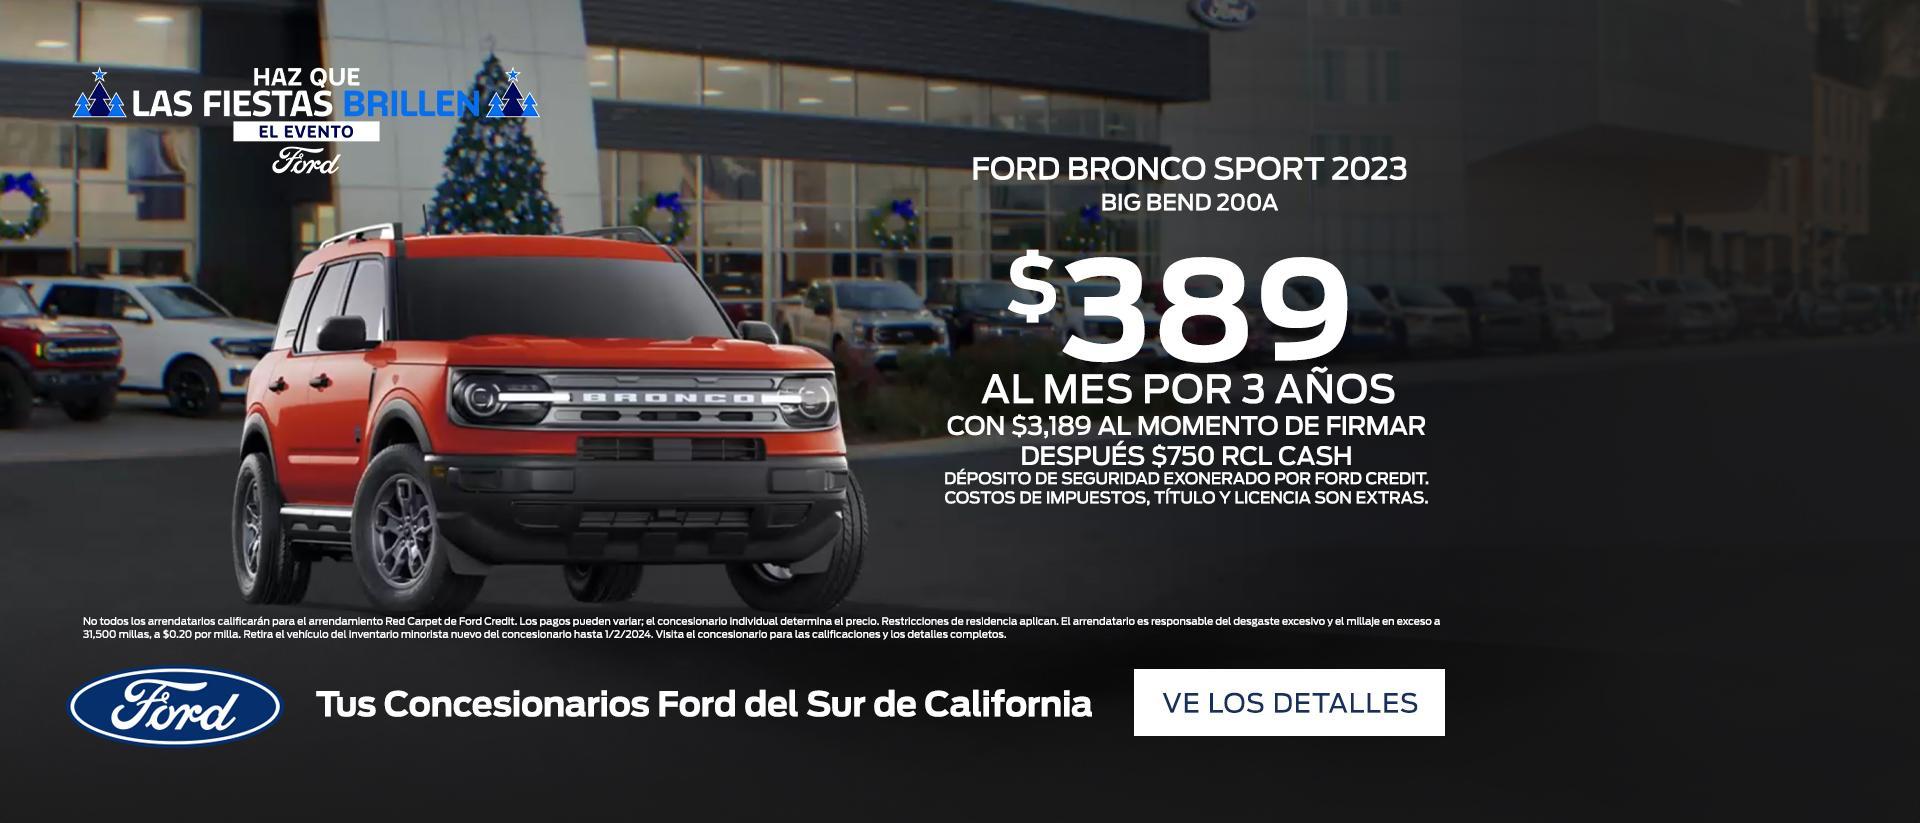 Make the Holidays Bright Sales Event | Ford Bronco Sport Lease Offer | Southern California Ford Dealers